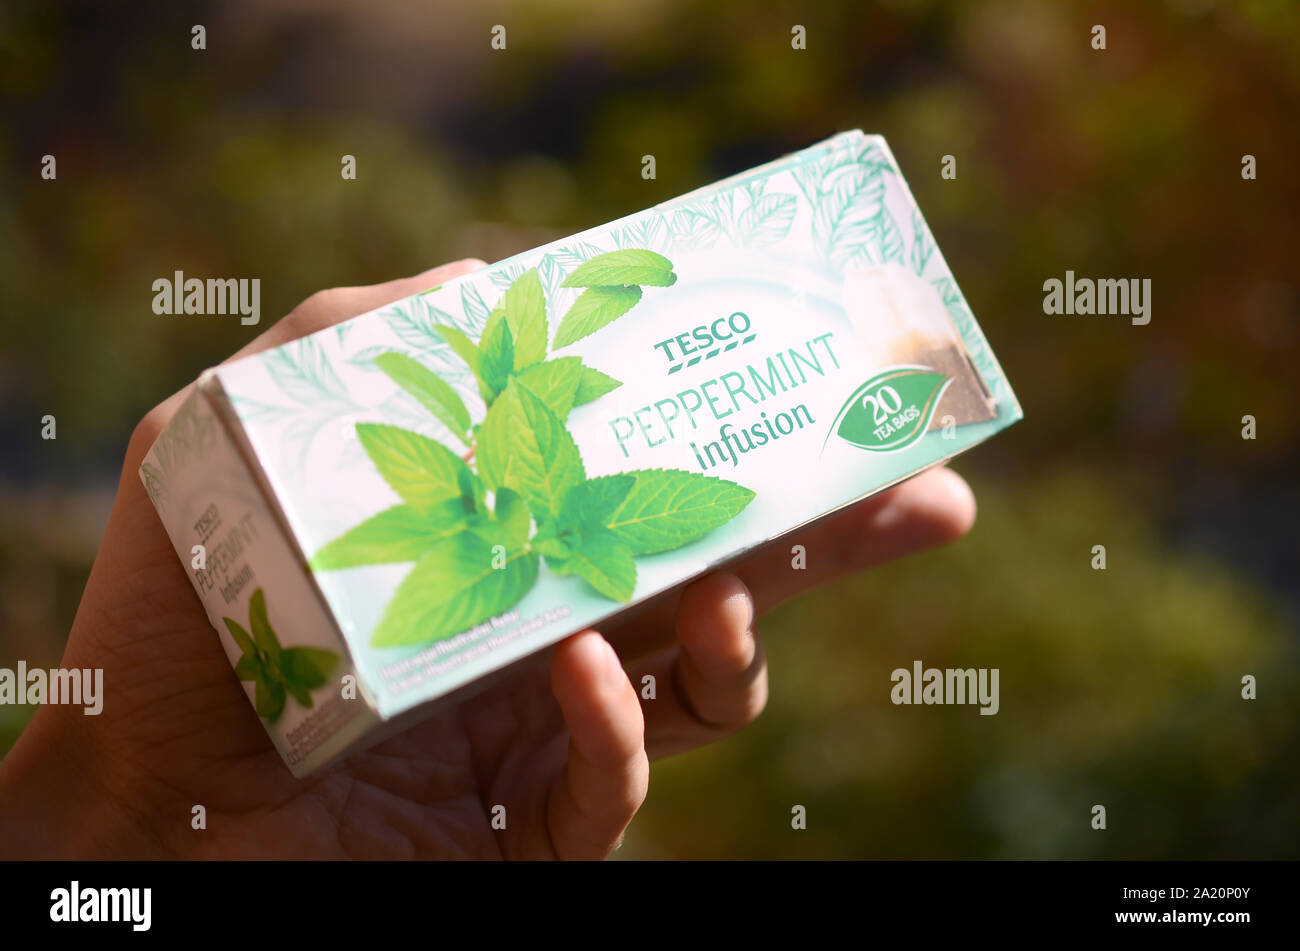 KHARKOV, UKRAINE - SEPTEMBER 23, 2019: Pack shot of peppermint infusion tea of Tesco plc in male hand. Tesco is a British multinational groceries and Stock Photo